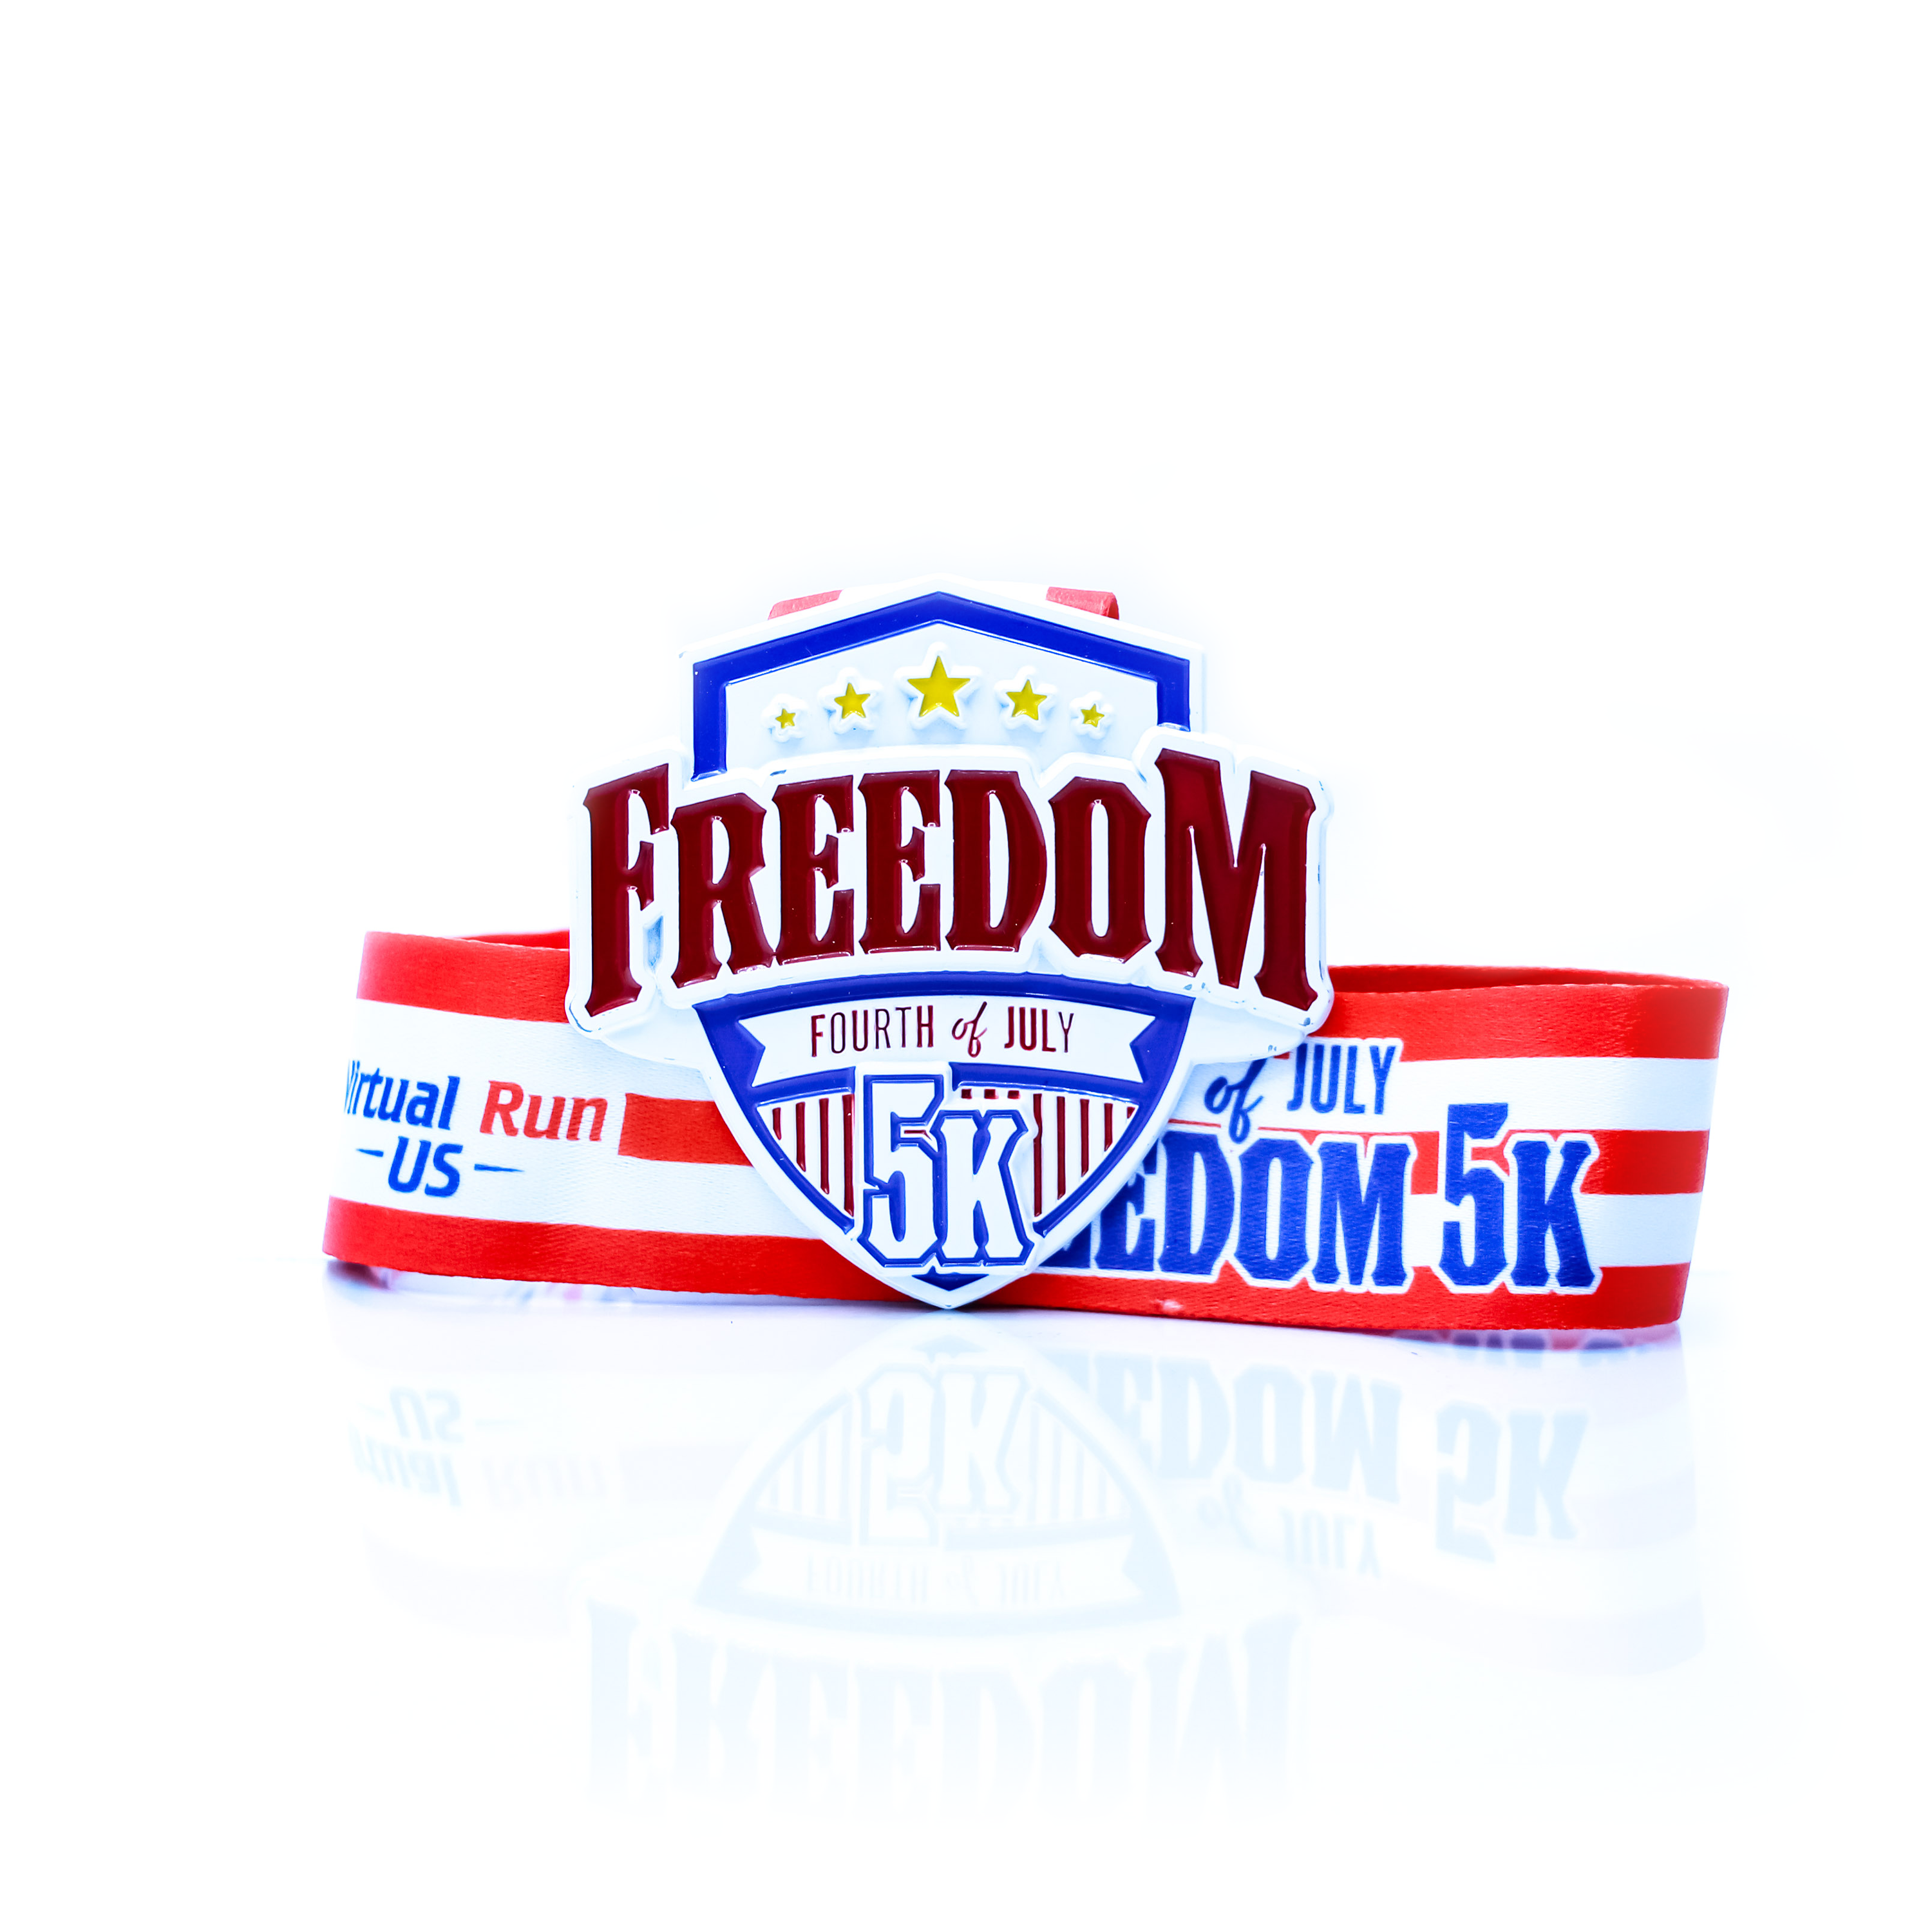 Freedom5k.png